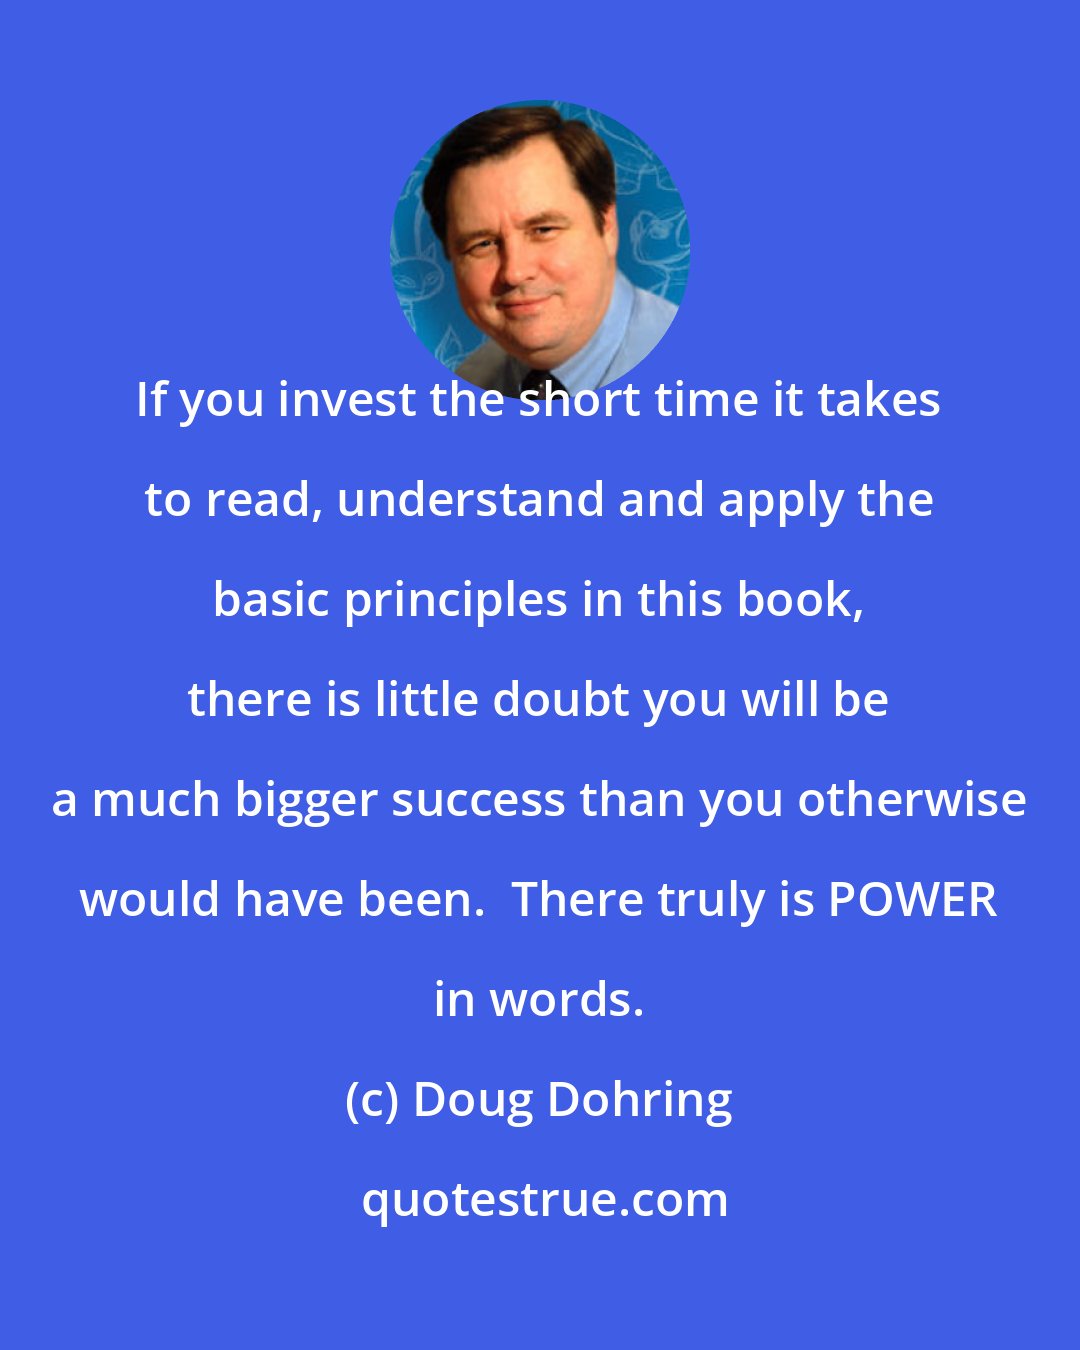 Doug Dohring: If you invest the short time it takes to read, understand and apply the basic principles in this book, there is little doubt you will be a much bigger success than you otherwise would have been.  There truly is POWER in words.